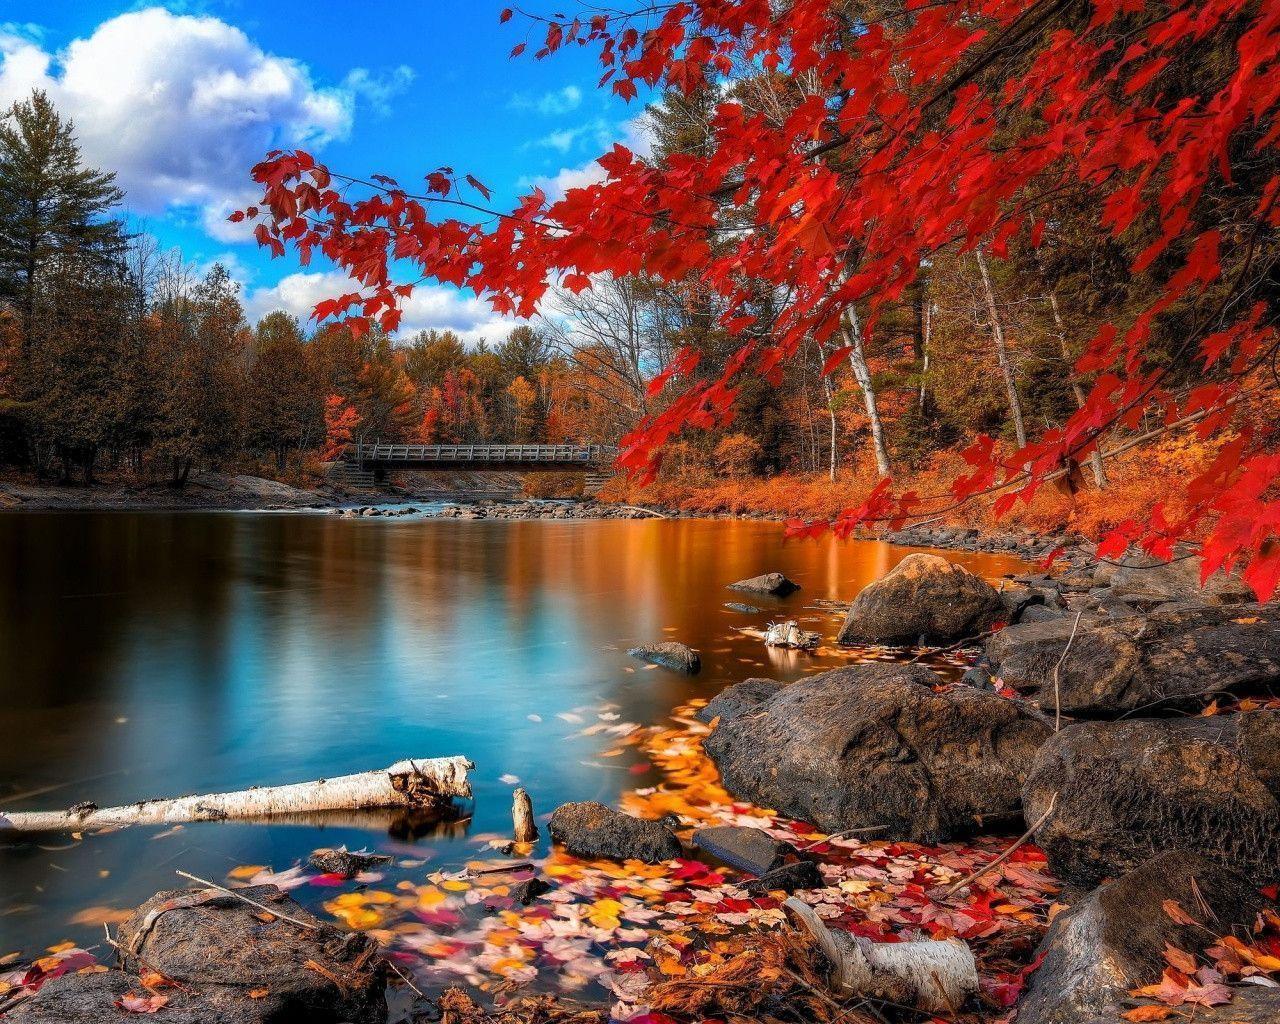 Description the wallpaper above is autumn forest scenery wallpaper